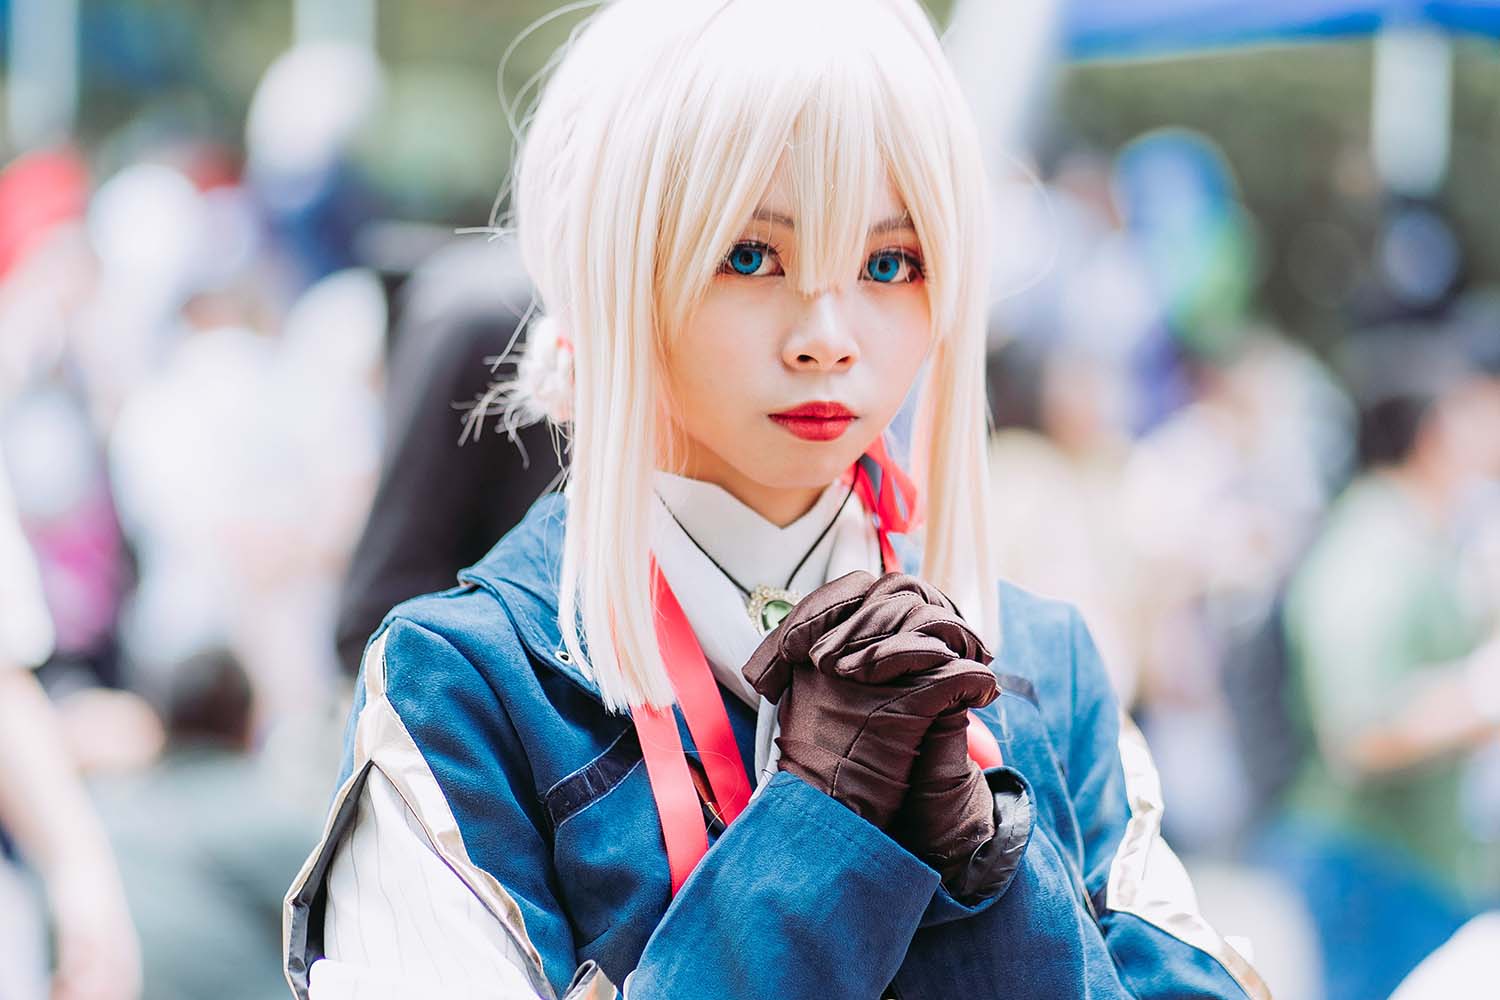 How And Why Has The Otaku Culture Taken Off Over In The United Kingdom?